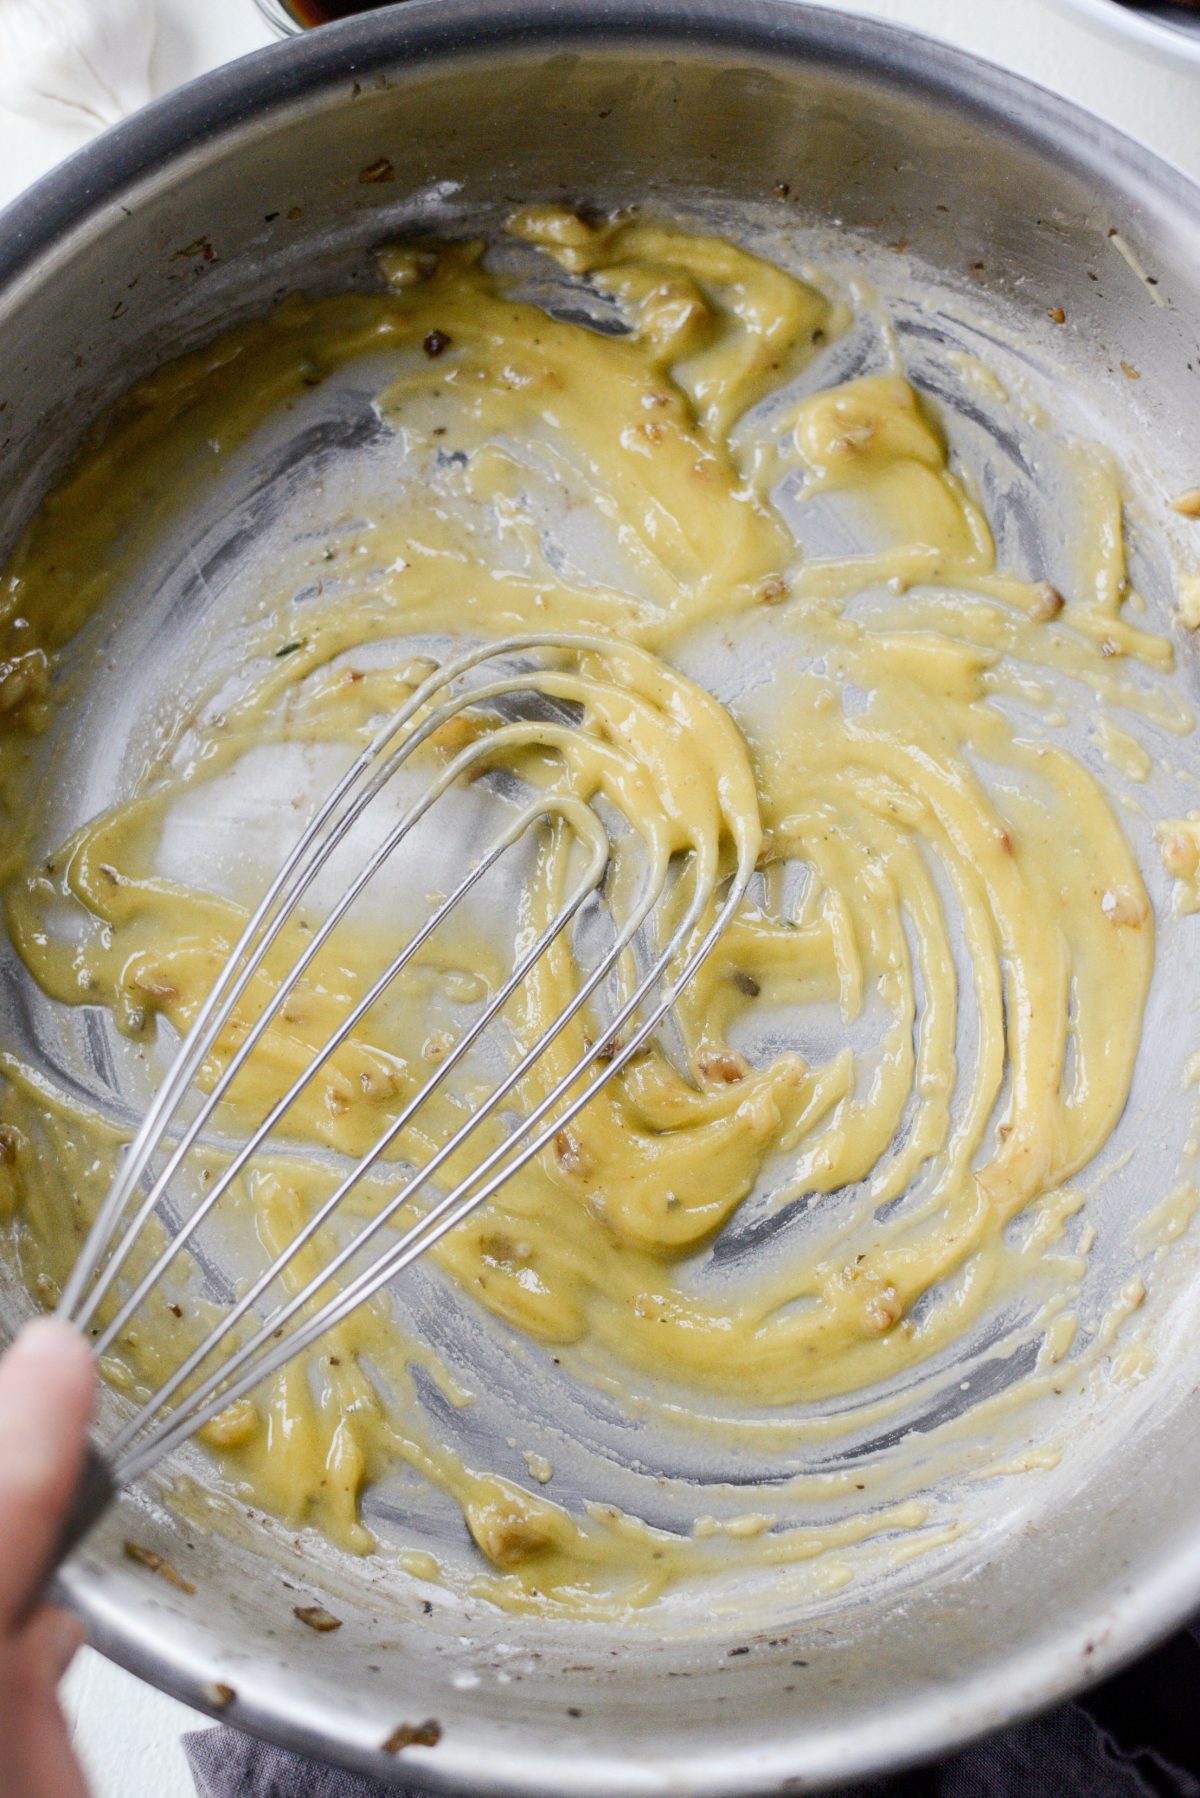 whisk and cook a few minutes